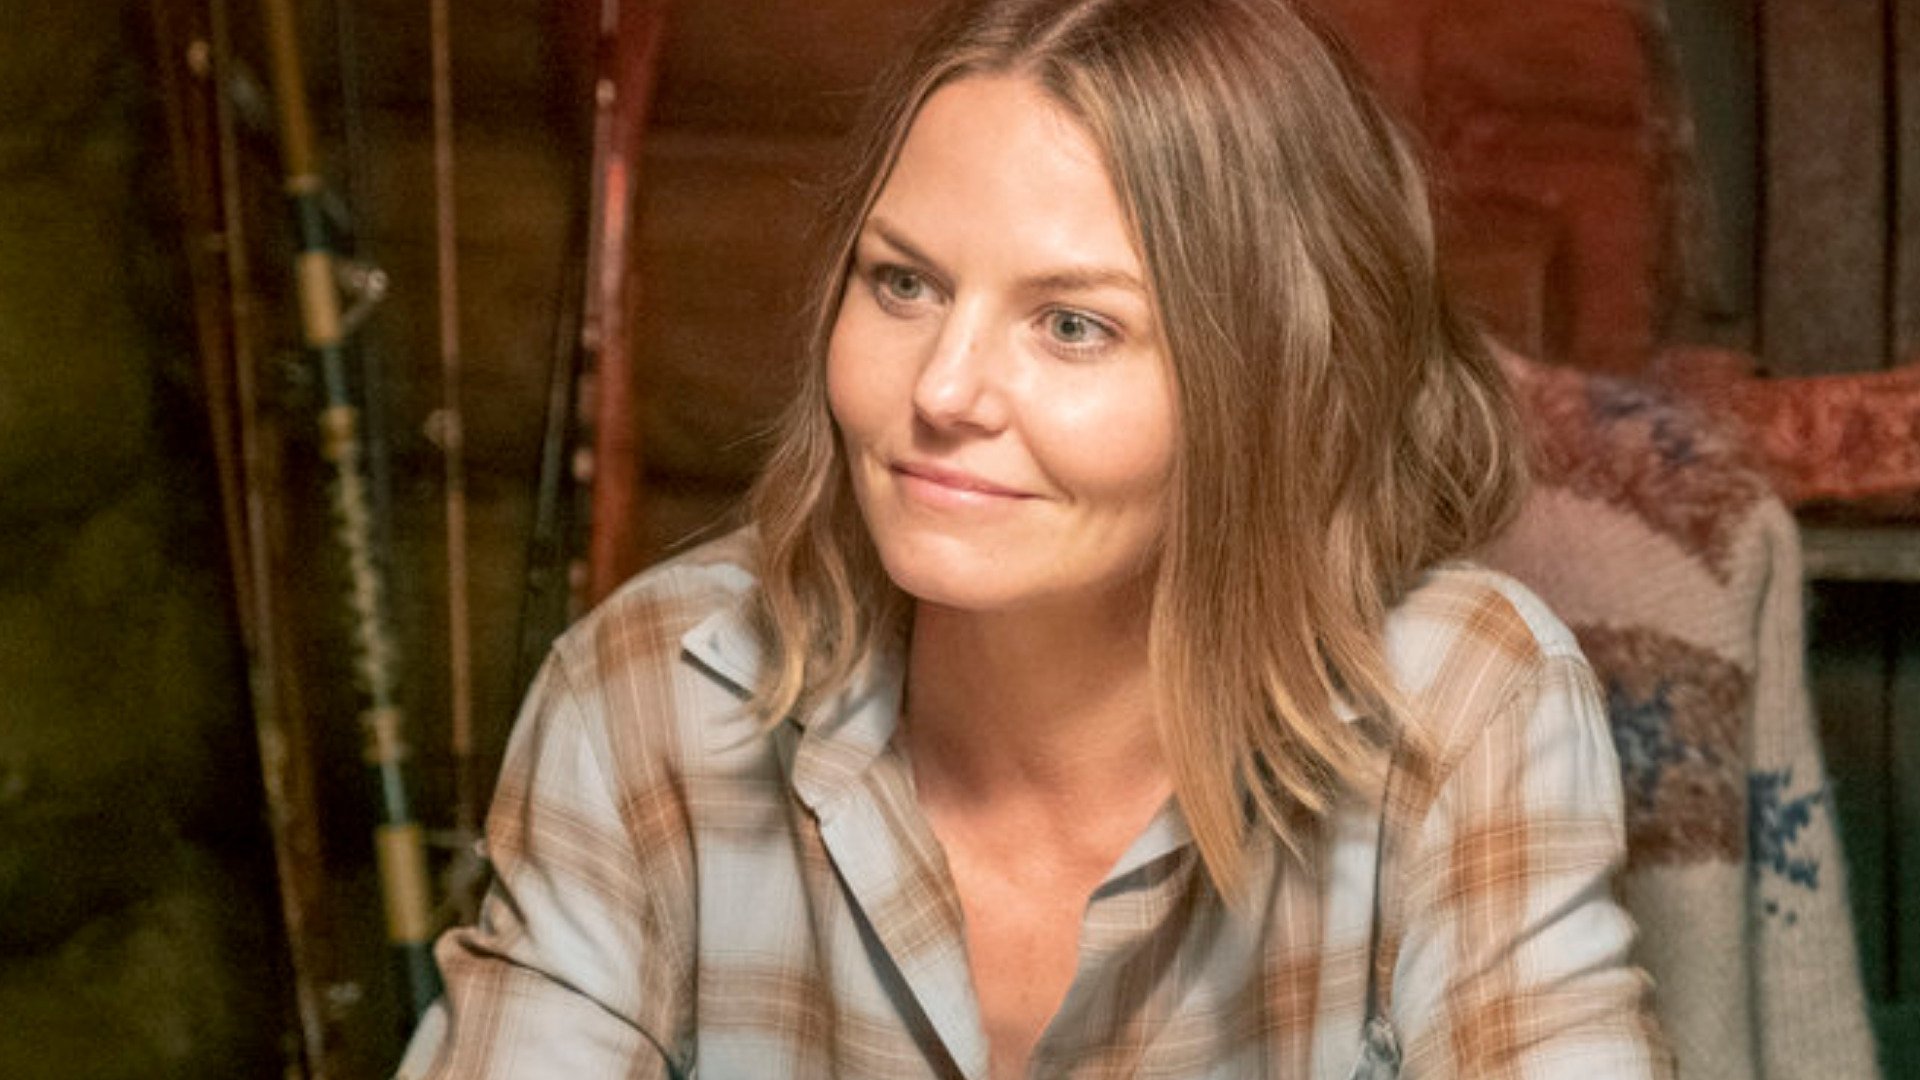 Jennifer Morrison as Cassidy smiling at dinner with Kevin, Edie, and Nicky in ‘This Is Us’ Season 6 Episode 5